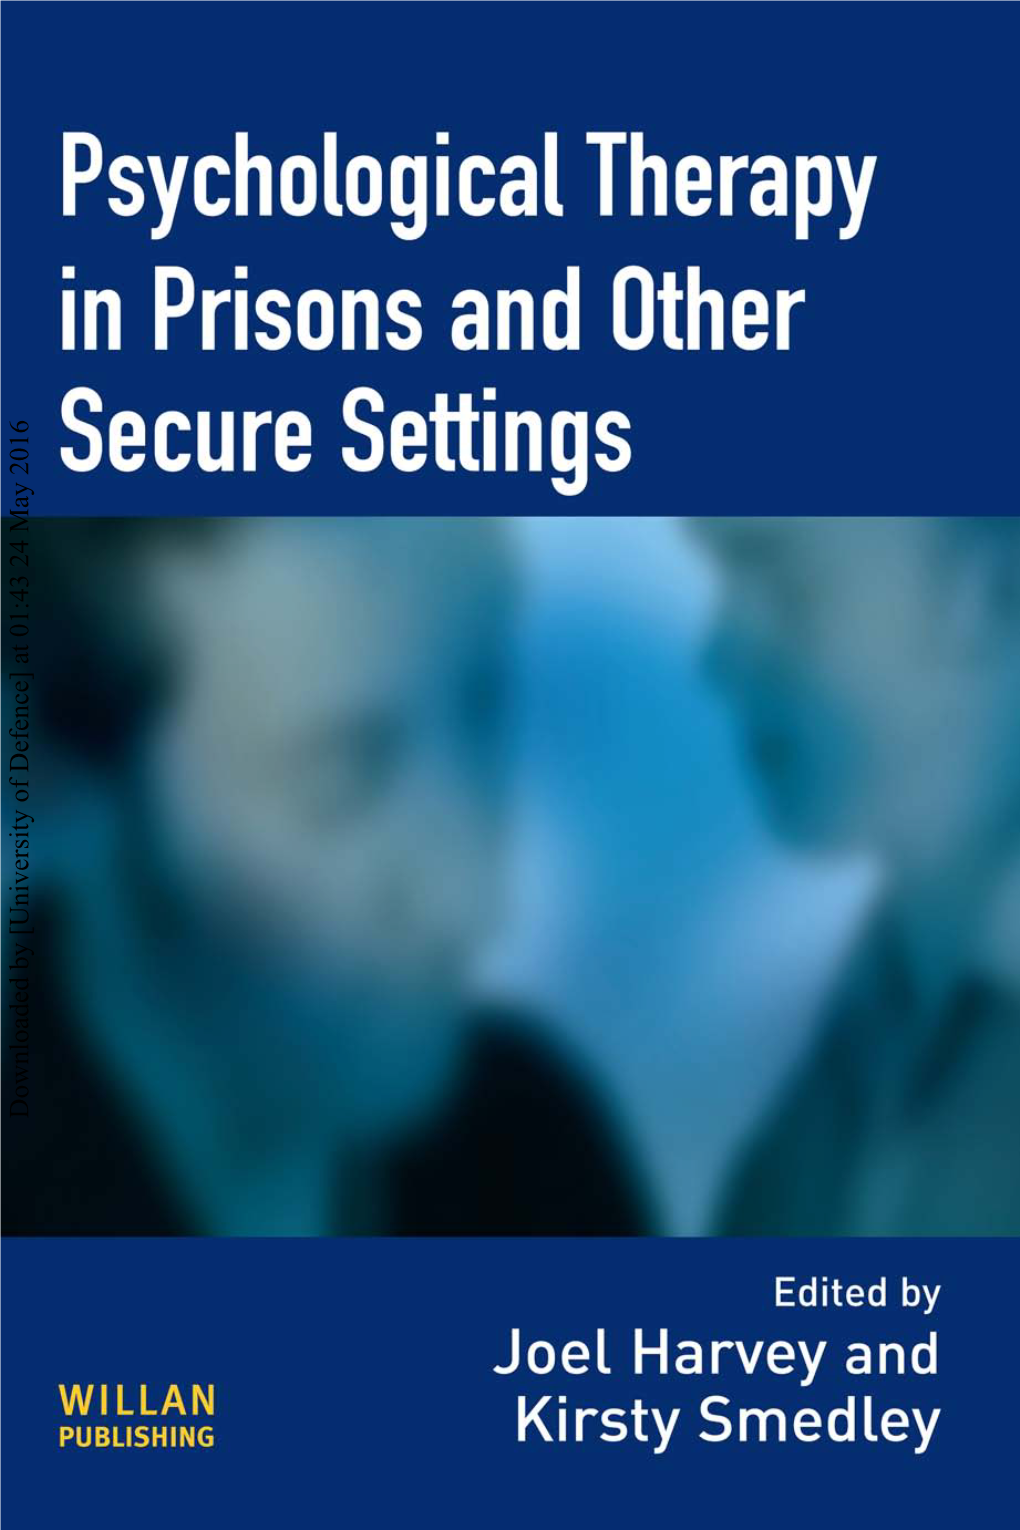 Psychological Therapy in Prisons and Other Secure Settings